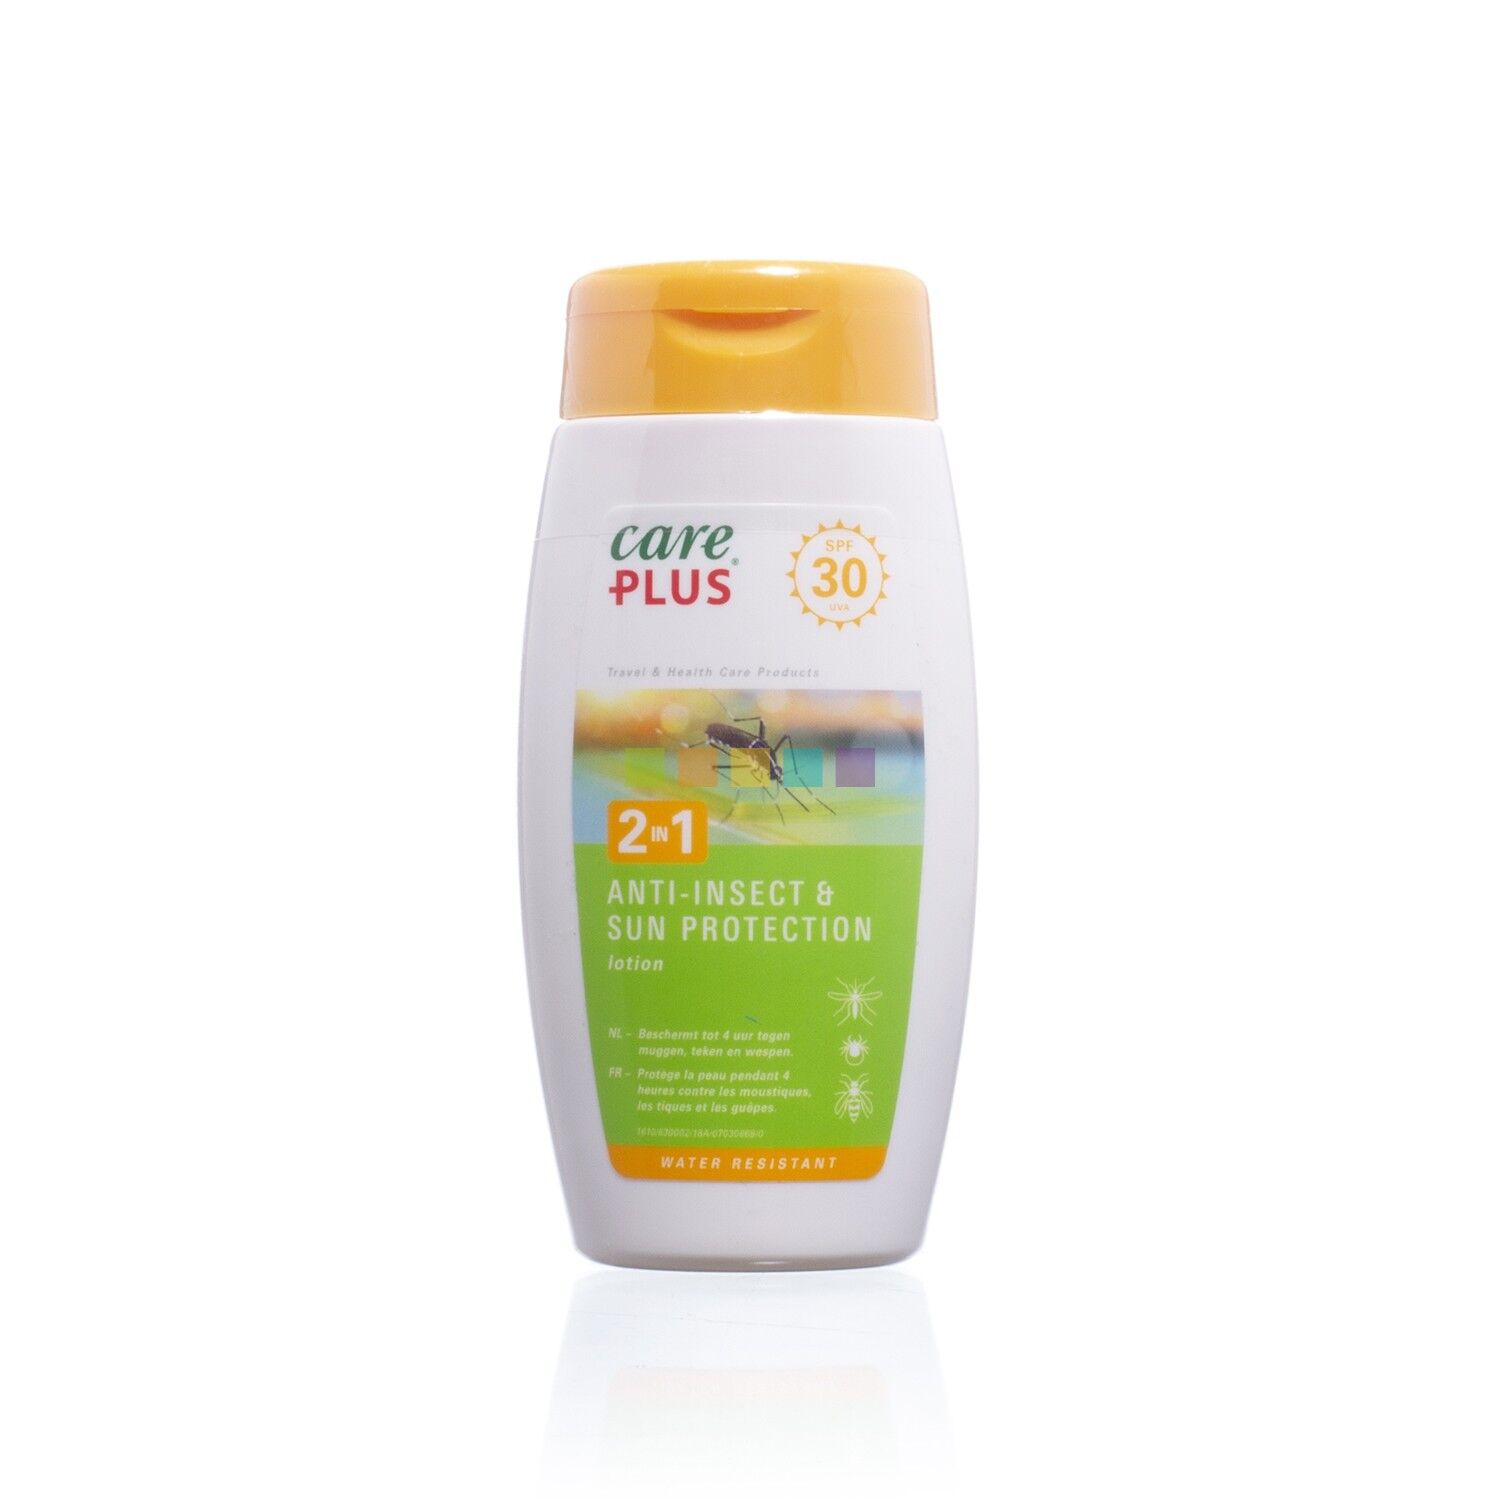 Care Plus 2in1 Anti-Insect & Sun Protection Lotion SPF30 - Insektspray